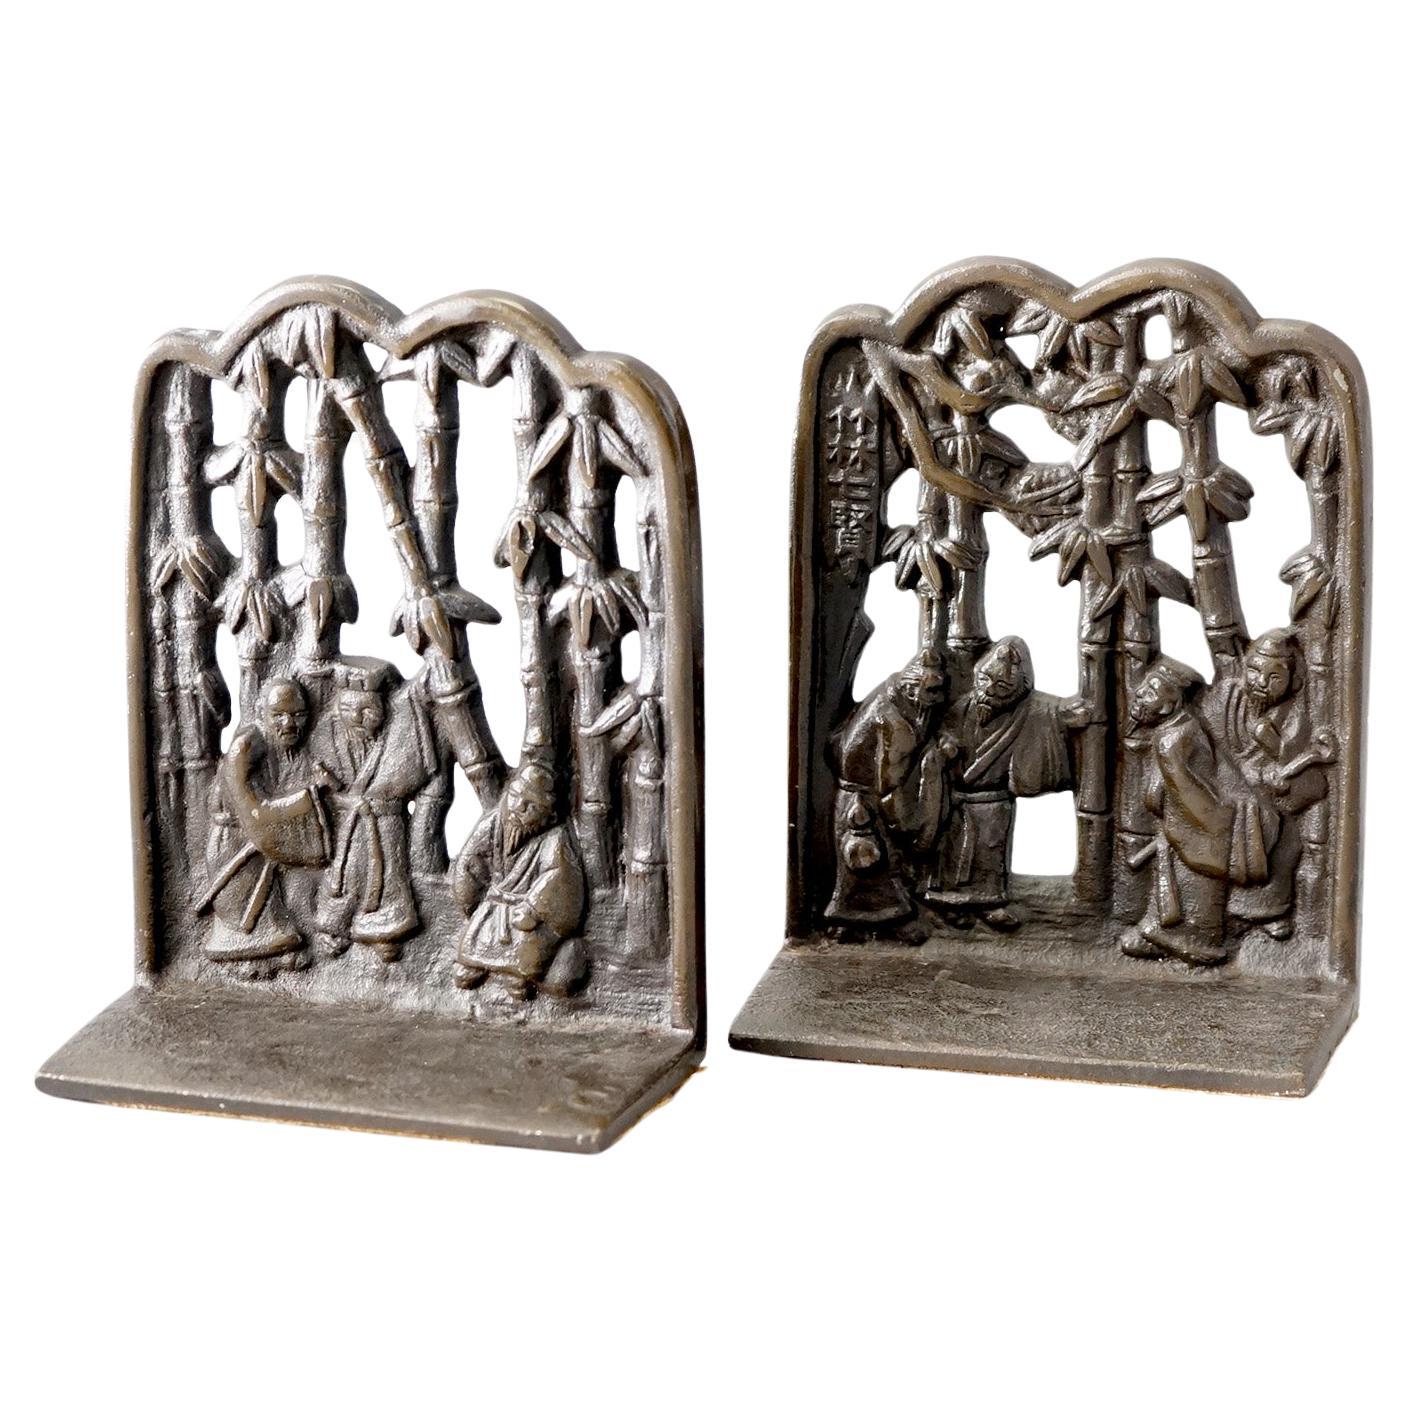  Pair of Chinese Cast Bronze Bookends with Figures & Bamboo, C1920 For Sale